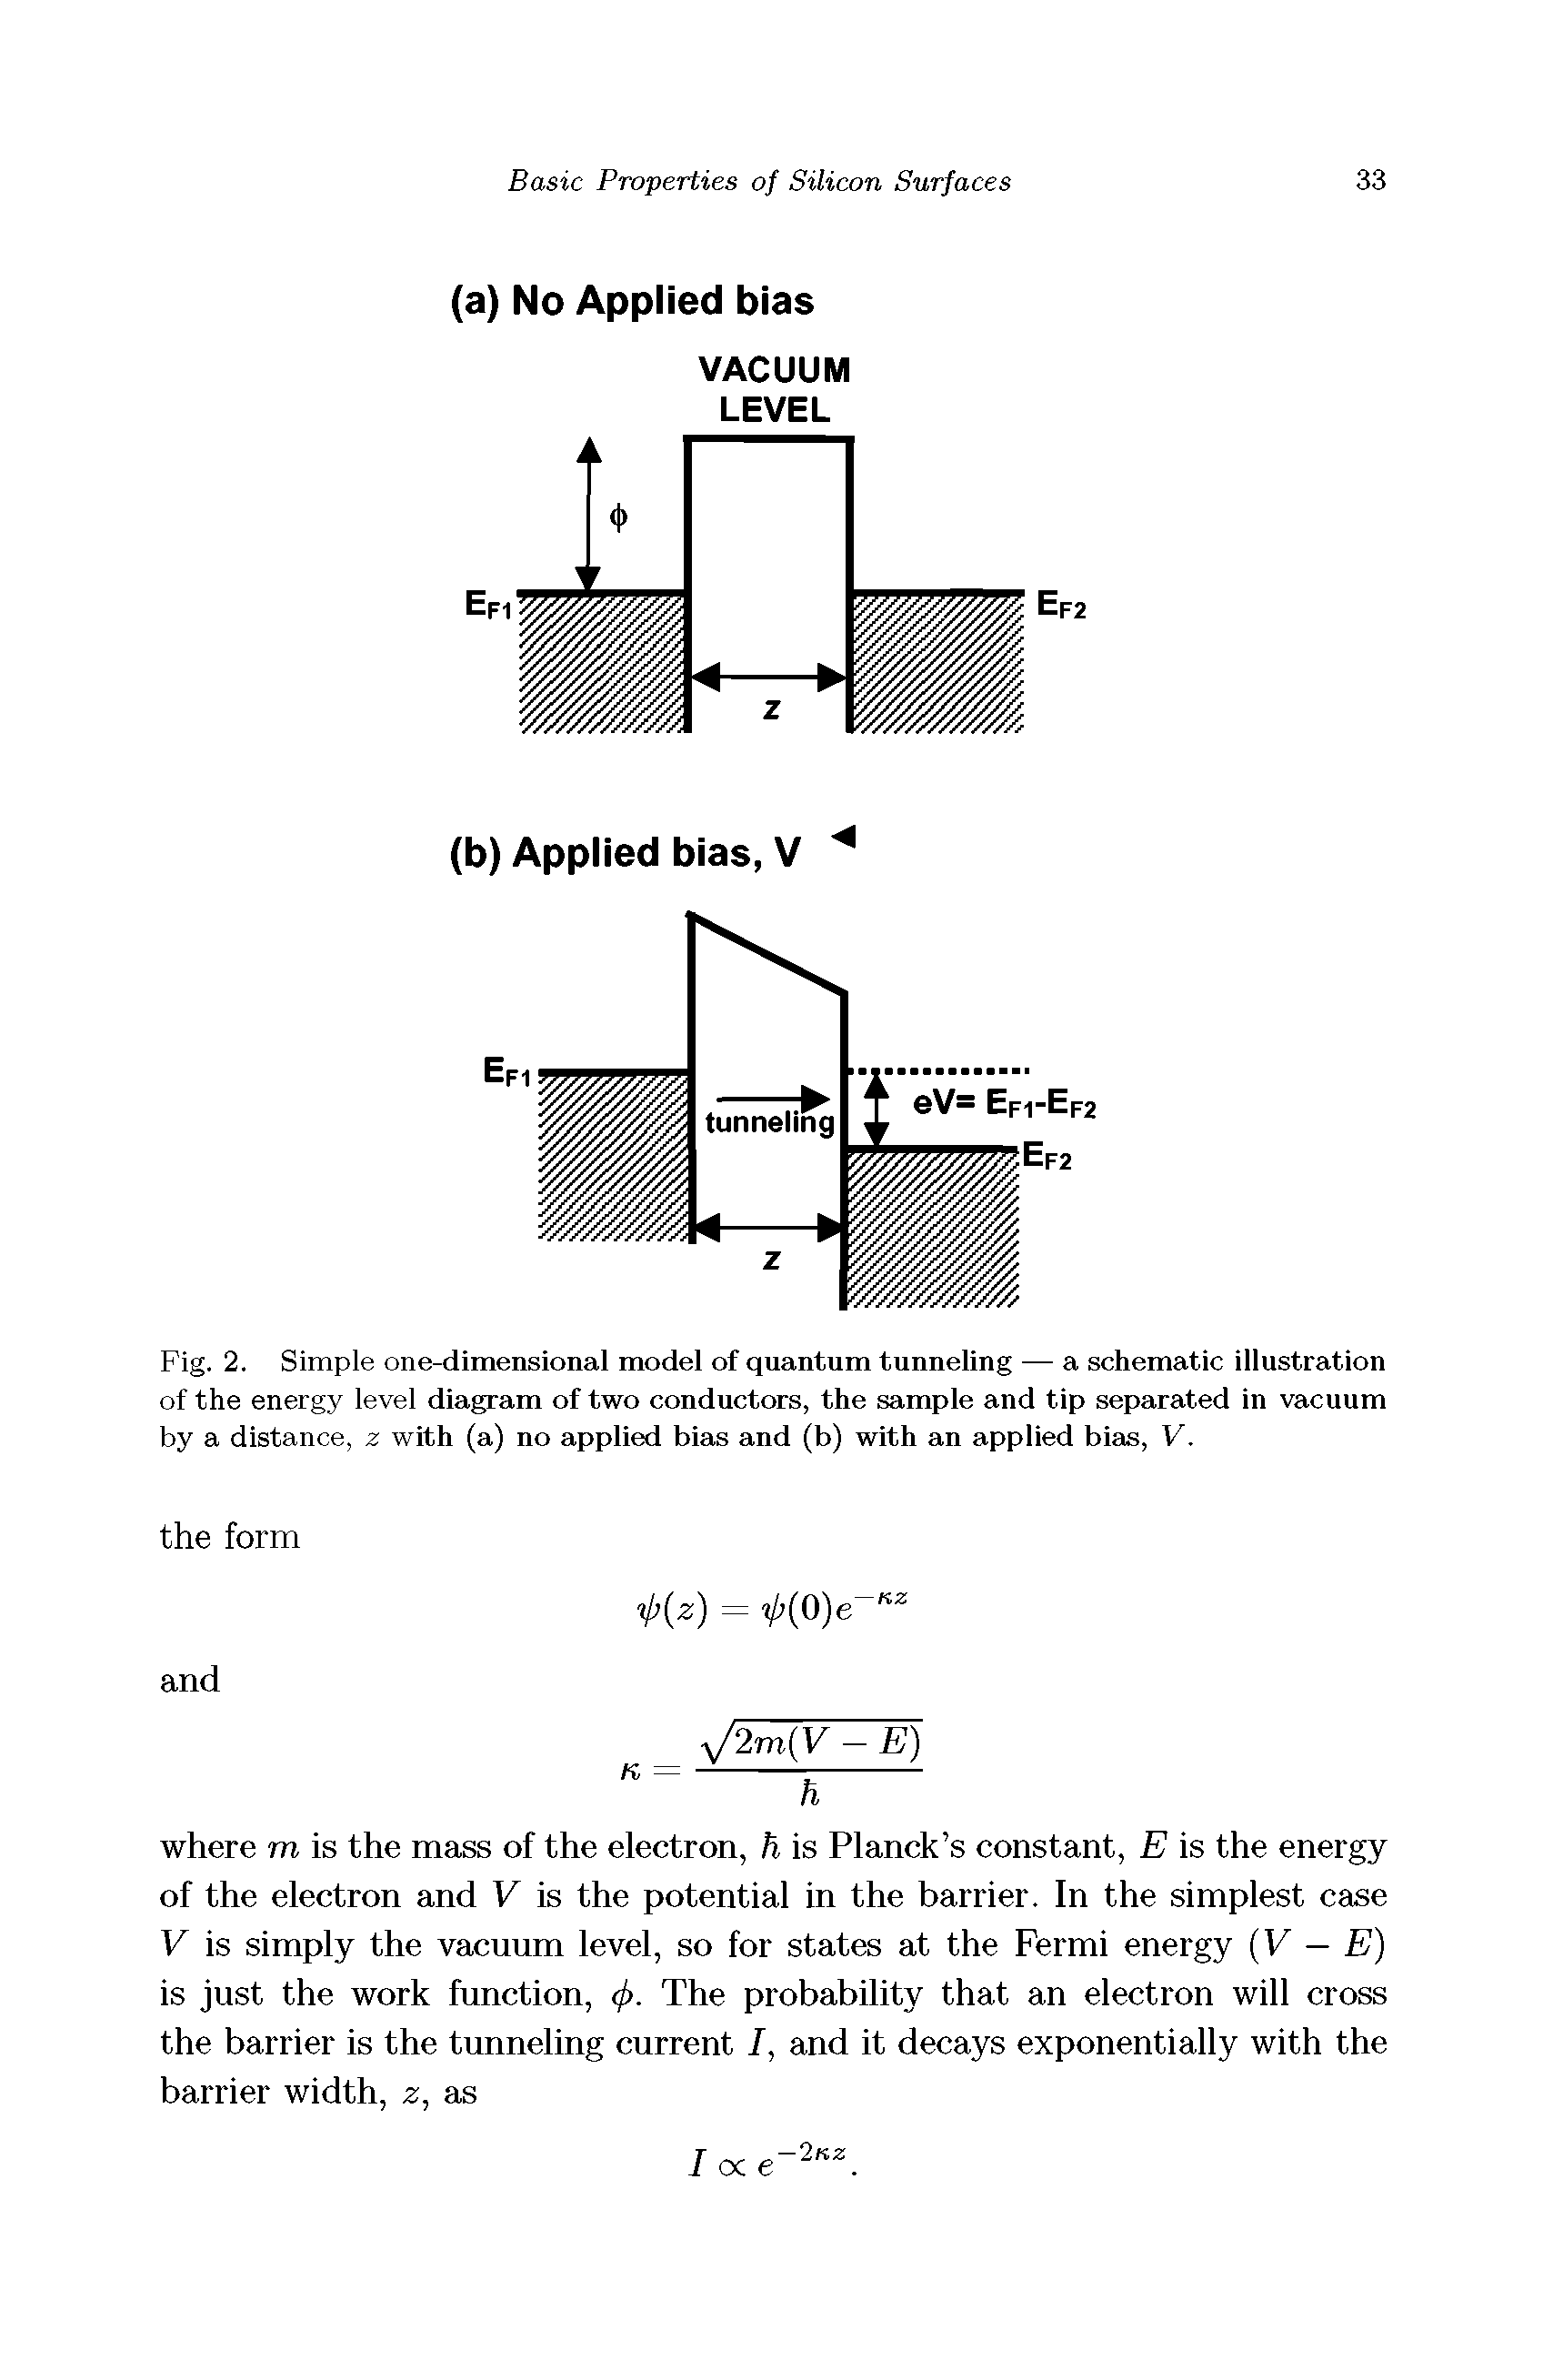 Fig. 2. Simple one-dimensional model of quantum tunneling — a schematic illustration of the energy level diagram of two conductors, the sample and tip separated in vacuum by a distance, z with (a) no applied bias and (b) with an applied bias, V.